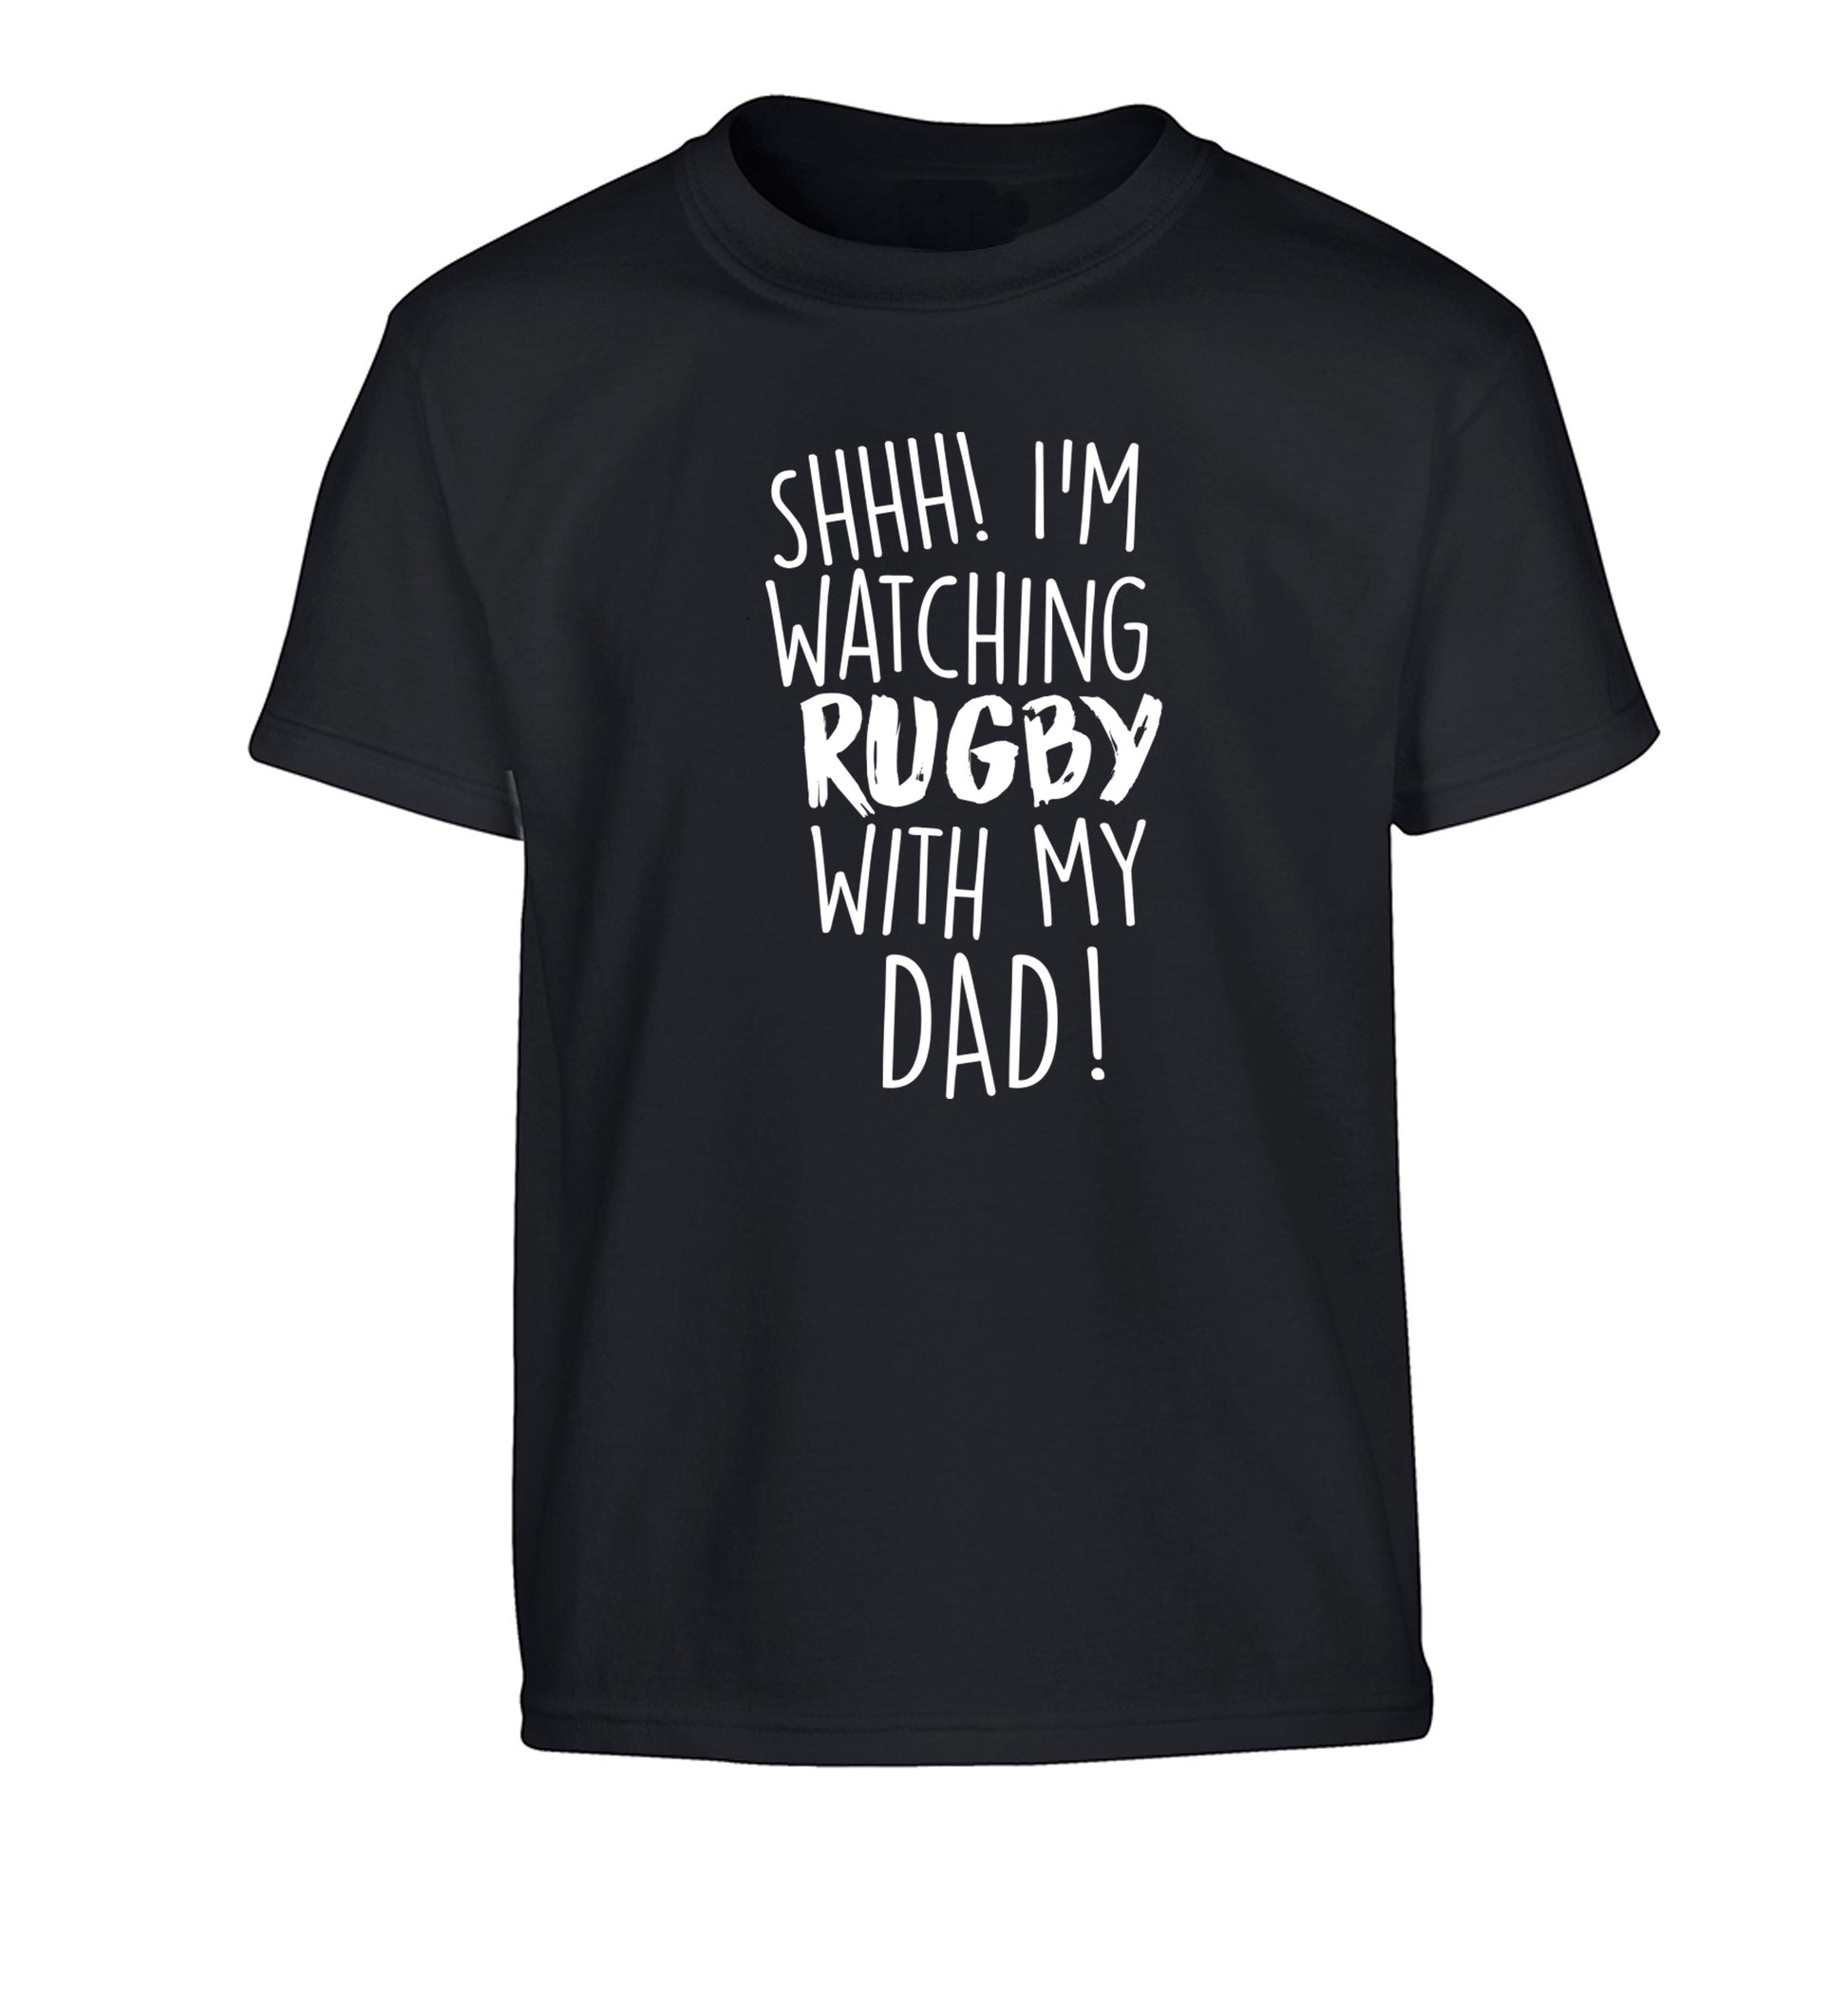 Shh... I'm watching rugby with my dad Children's black Tshirt 12-13 Years